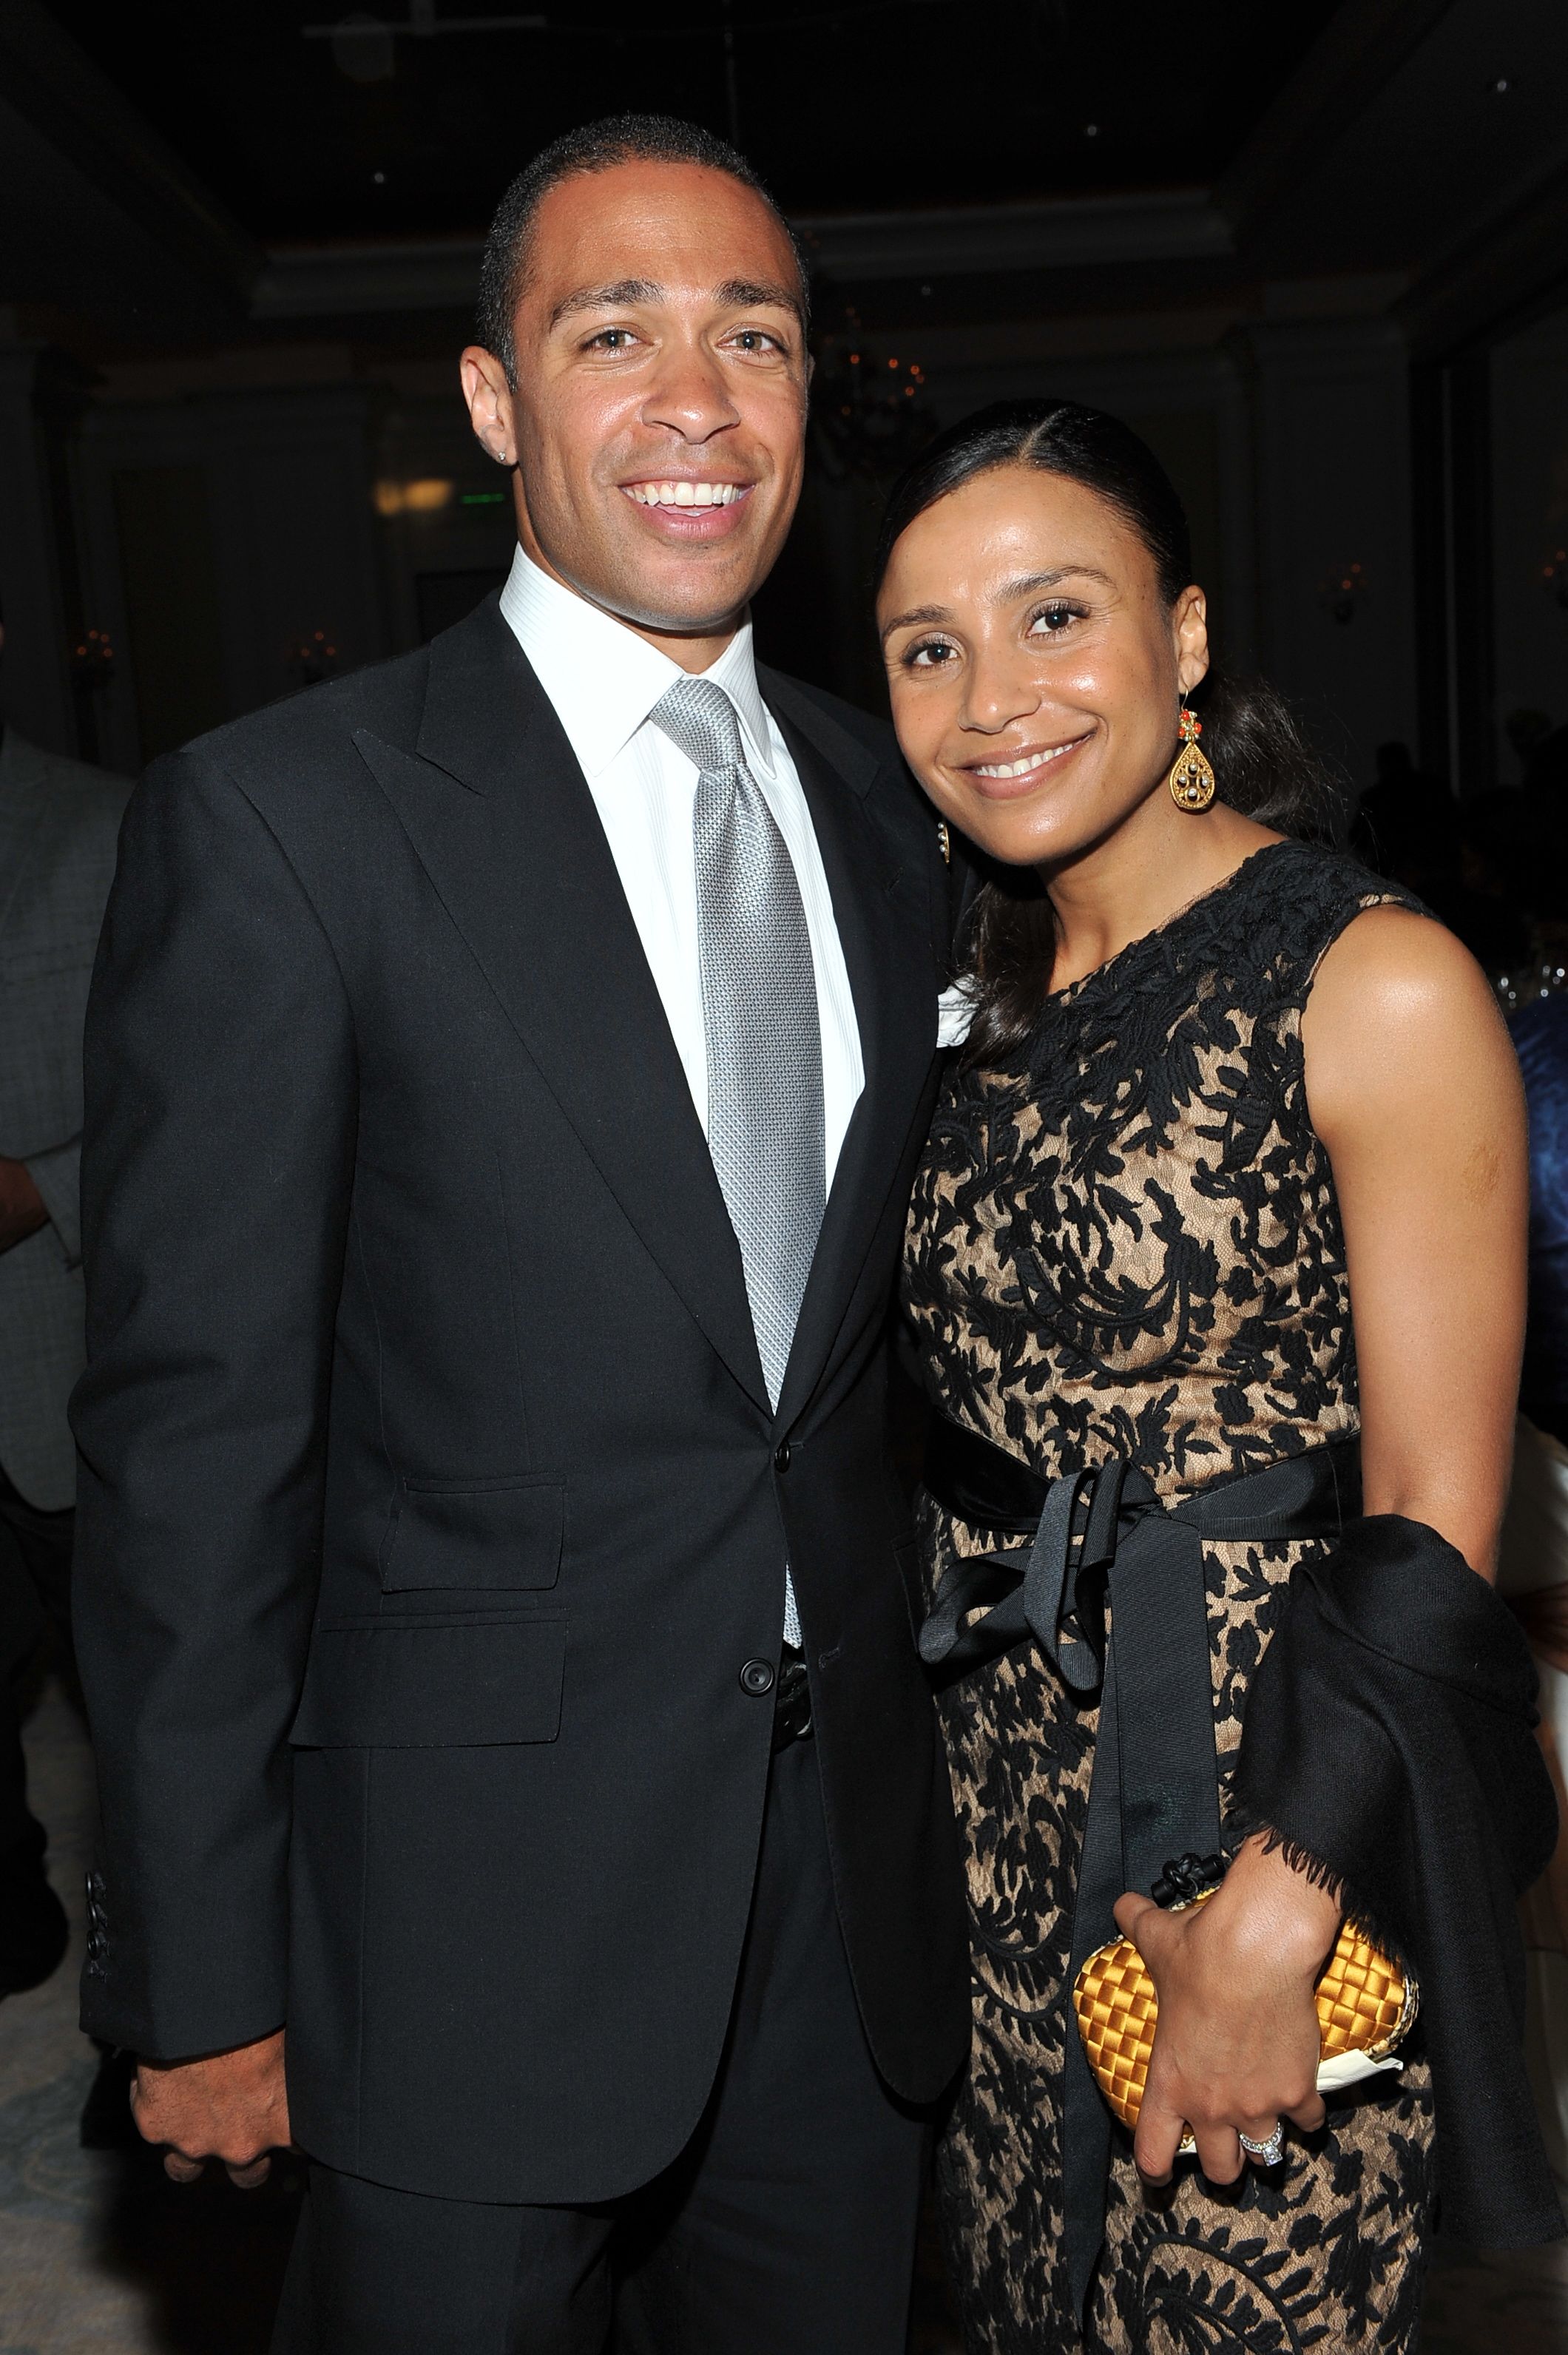 TJ Holmes and Marilee Fiebig at the 2012 Caring for Congo gala on April 28, 2012, in Atlanta | Source: Getty Images